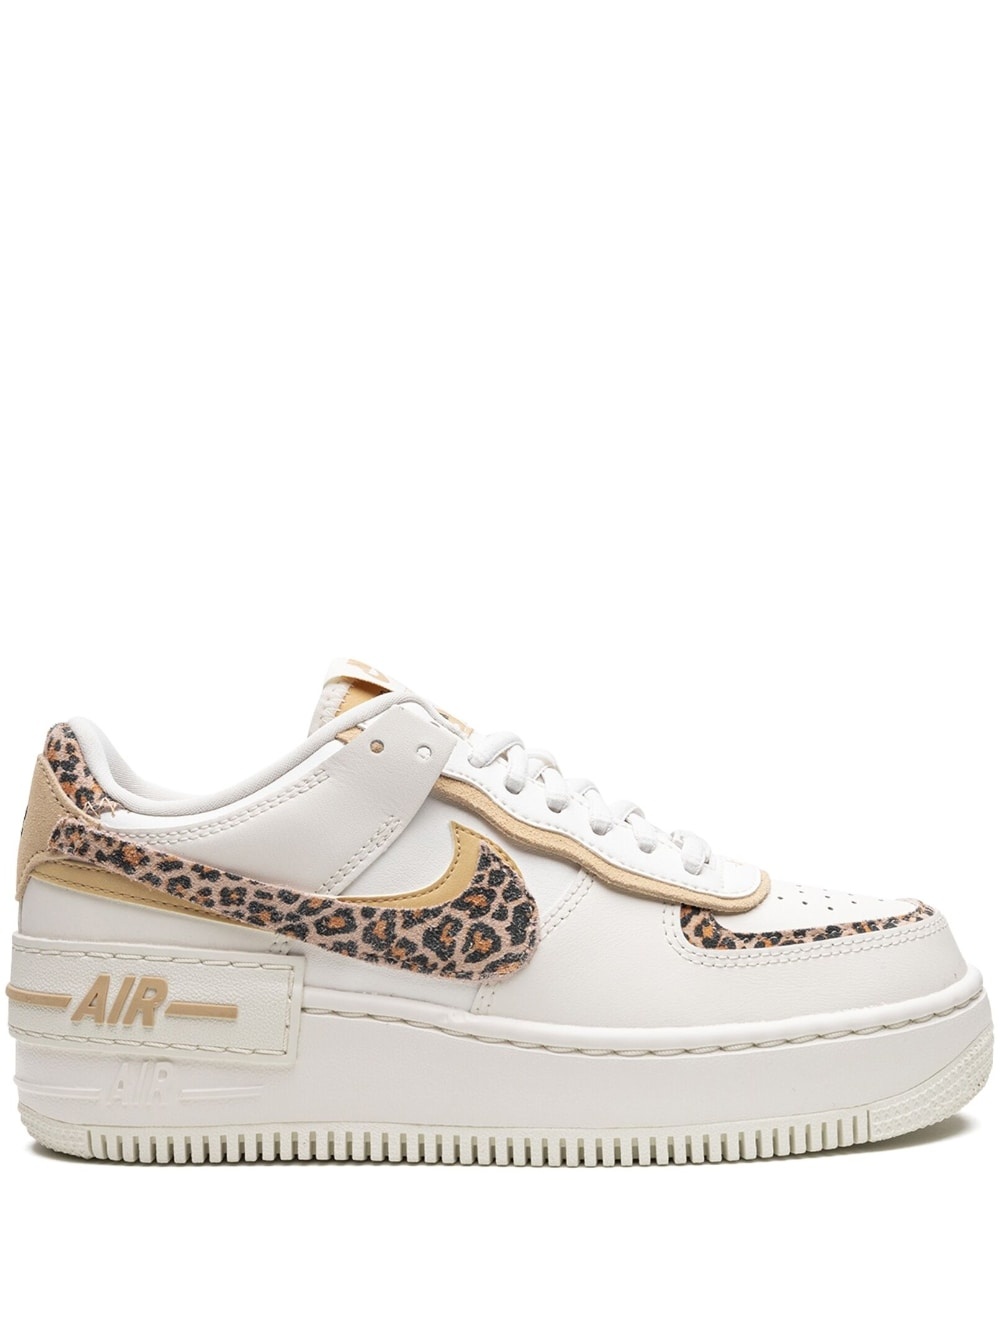 Air Force 1 Low Shadow "Leopard" sneakers - 1